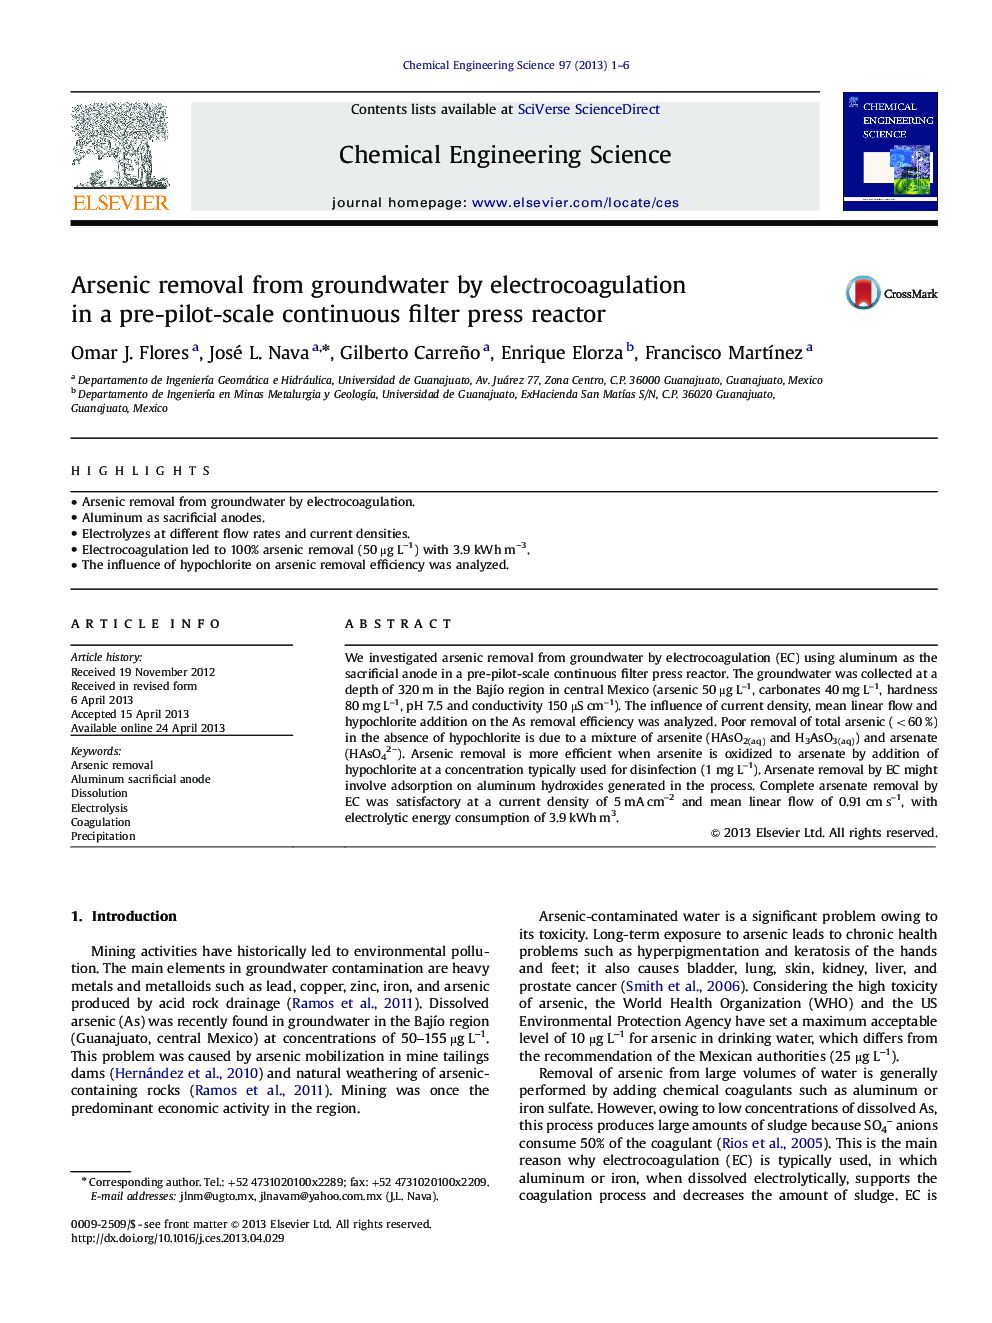 Arsenic removal from groundwater by electrocoagulation in a pre-pilot-scale continuous filter press reactor